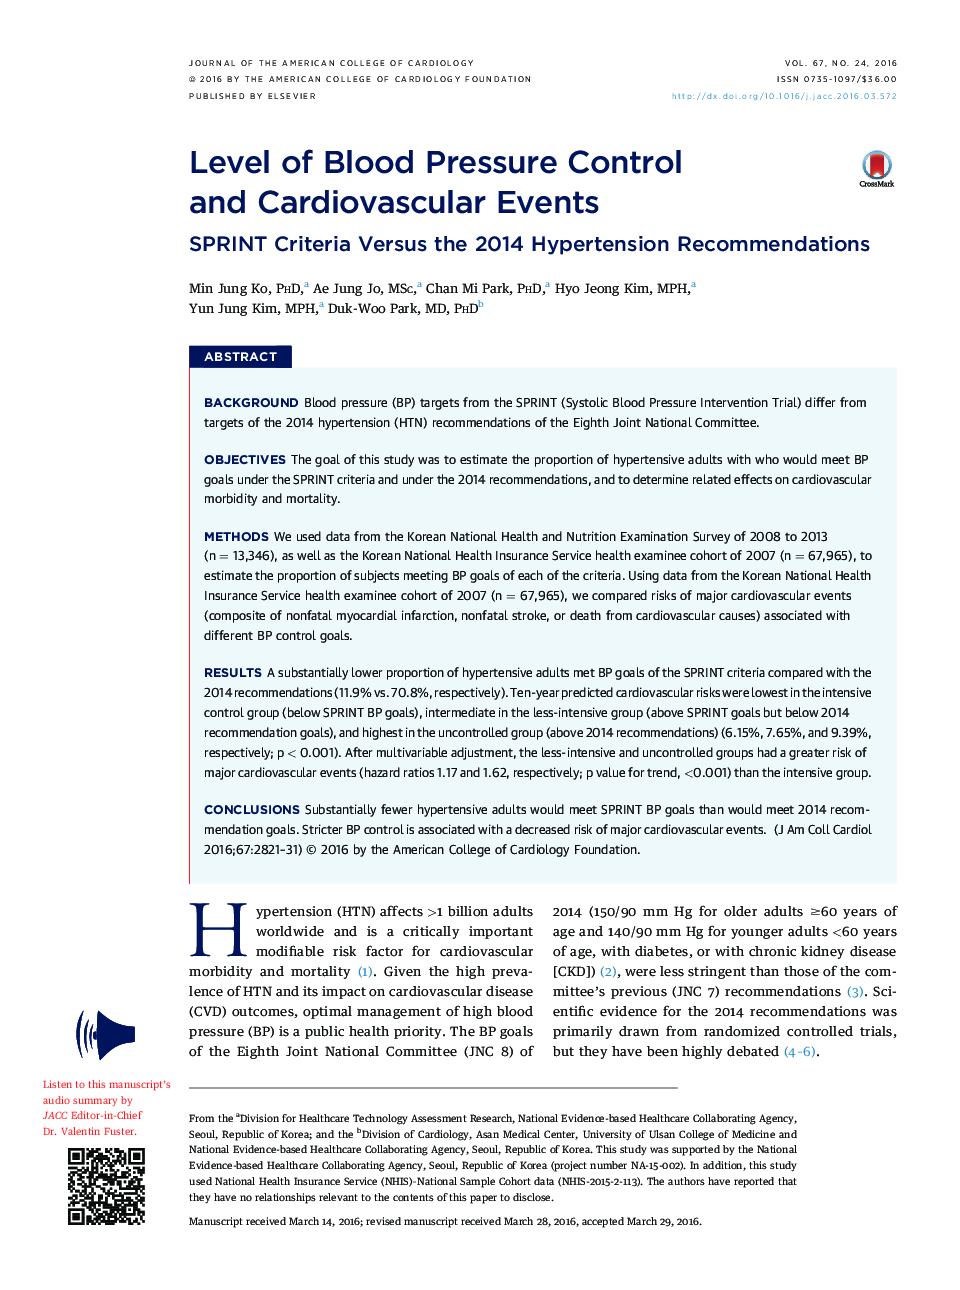 Level of Blood Pressure Control and Cardiovascular Events : SPRINT Criteria Versus the 2014 Hypertension Recommendations